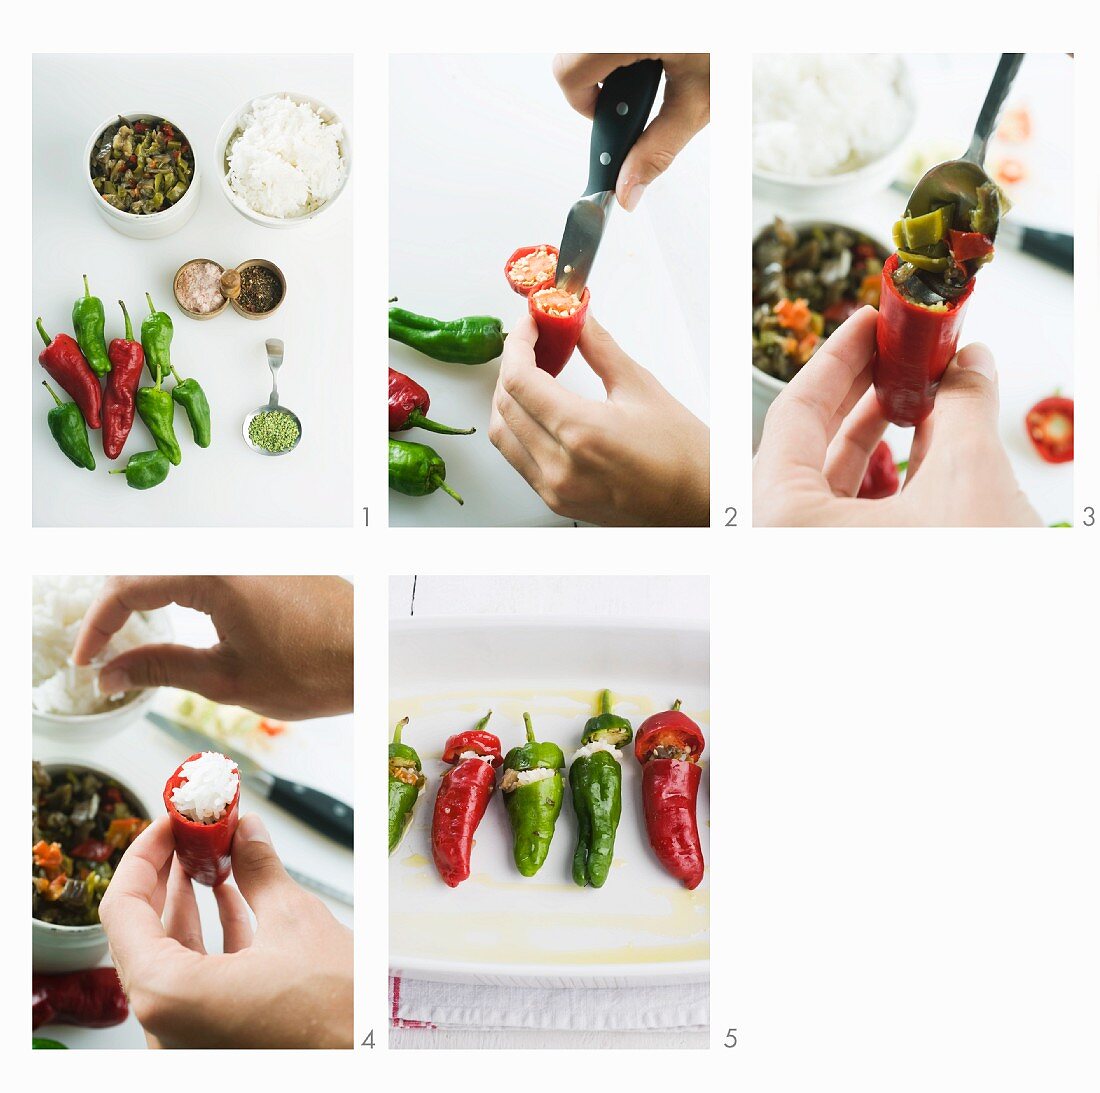 Stuffed chillis being made